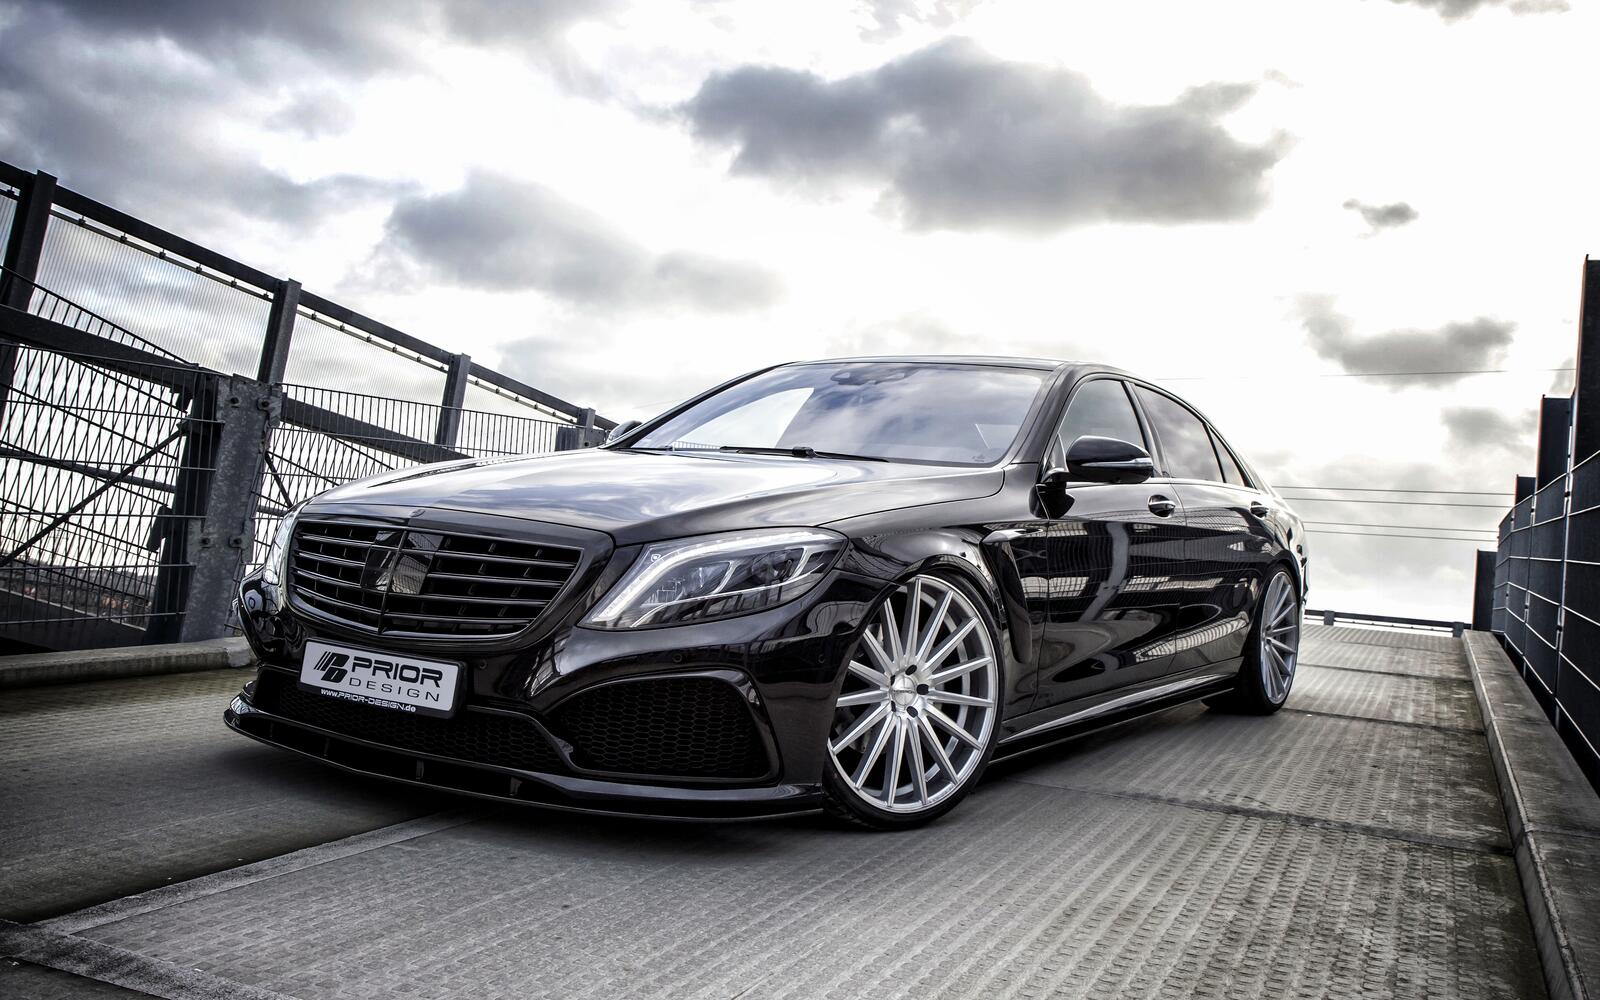 Free photo Black mercedes benz s class on cool rims